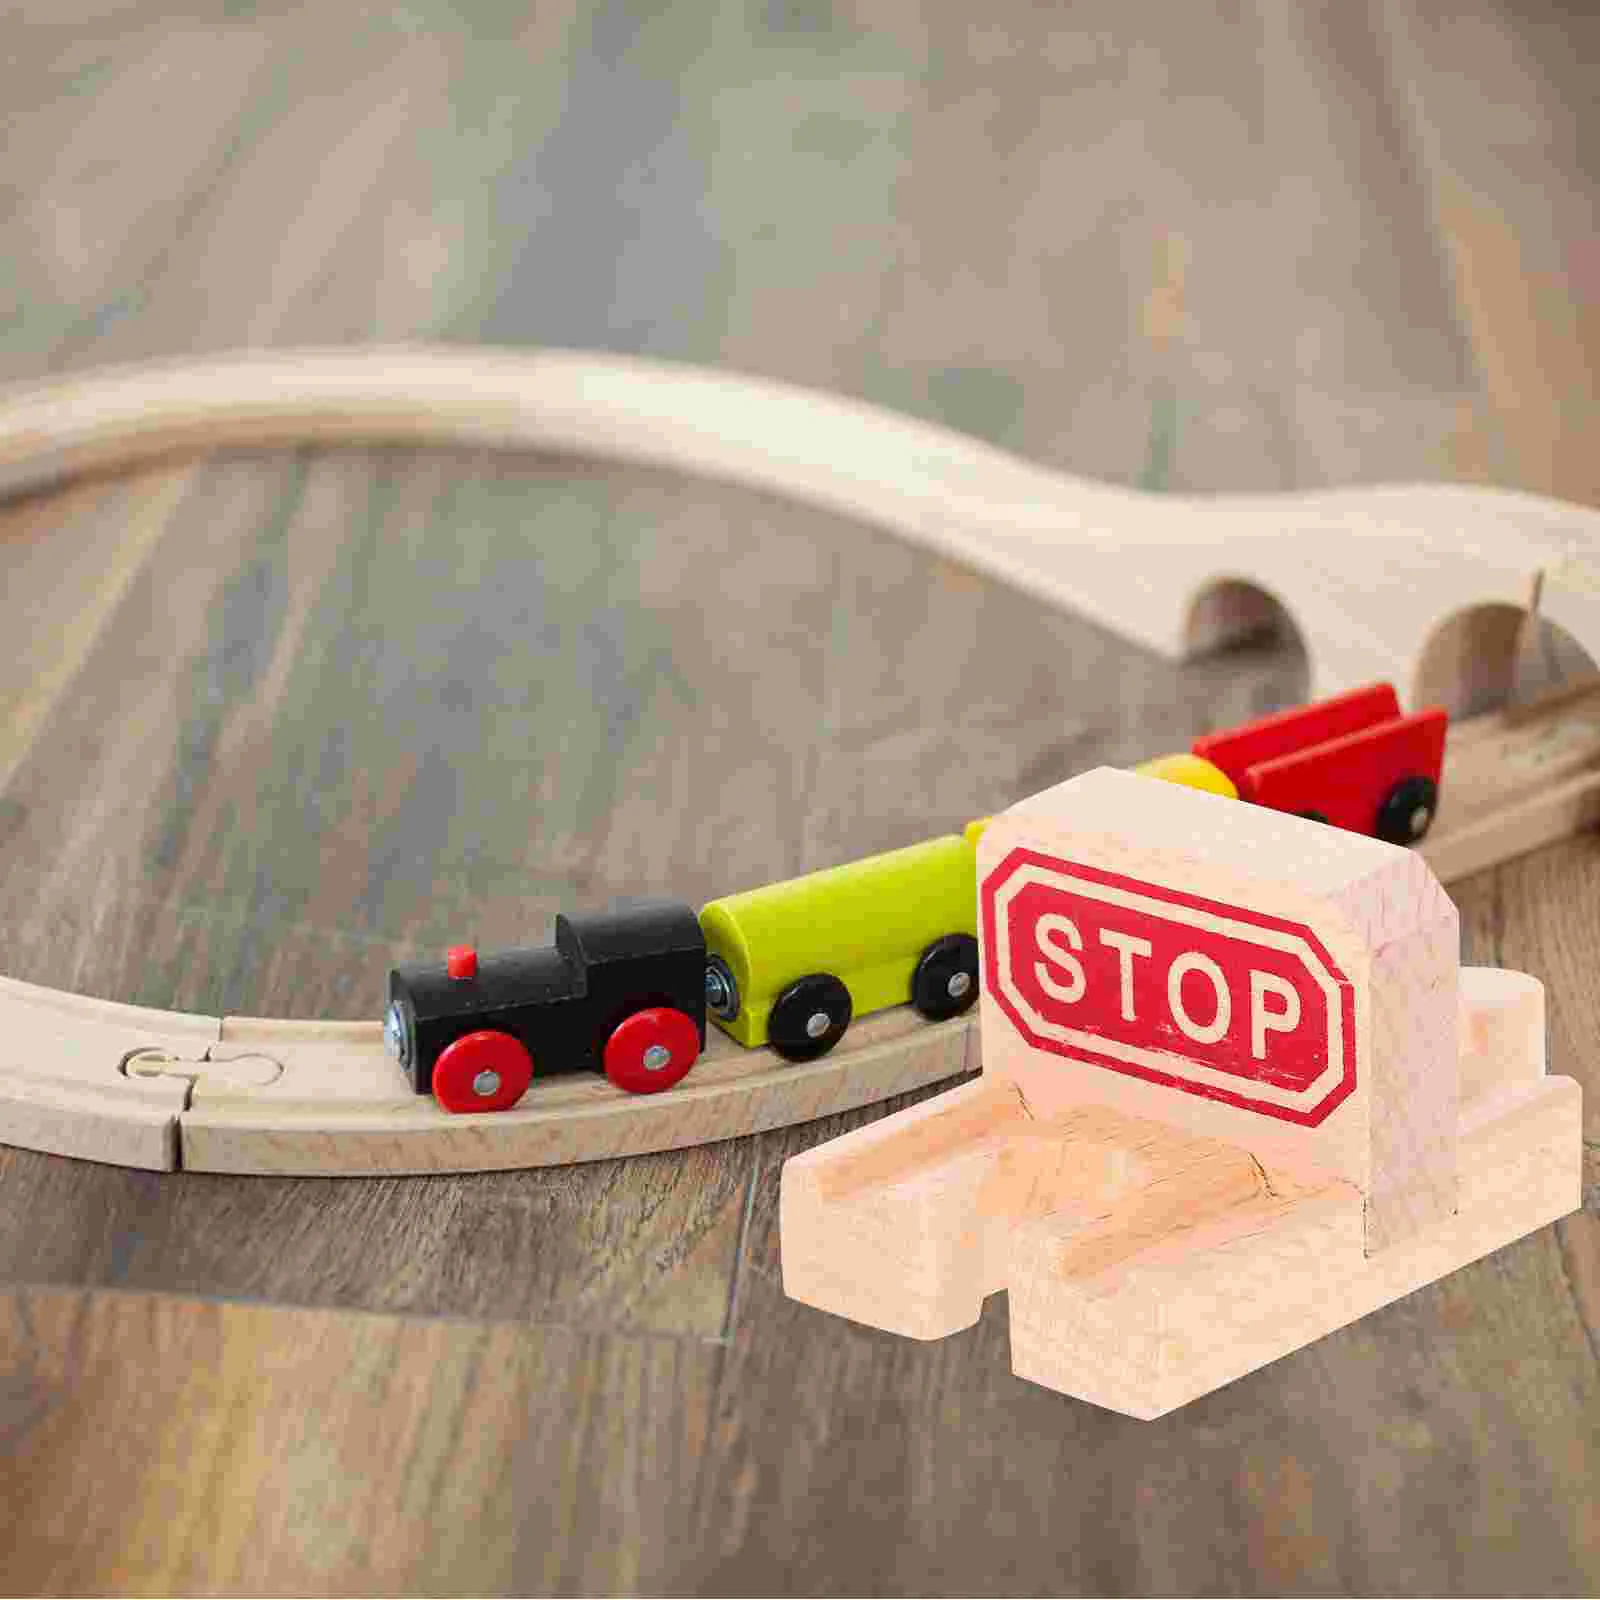 2Pcs Wooden Train Track Toy Railway Expansion Stop Track Train Toy Accessory slot car straight track junction connecting section expansion accessory parts sets for carrera go 1 43 scale